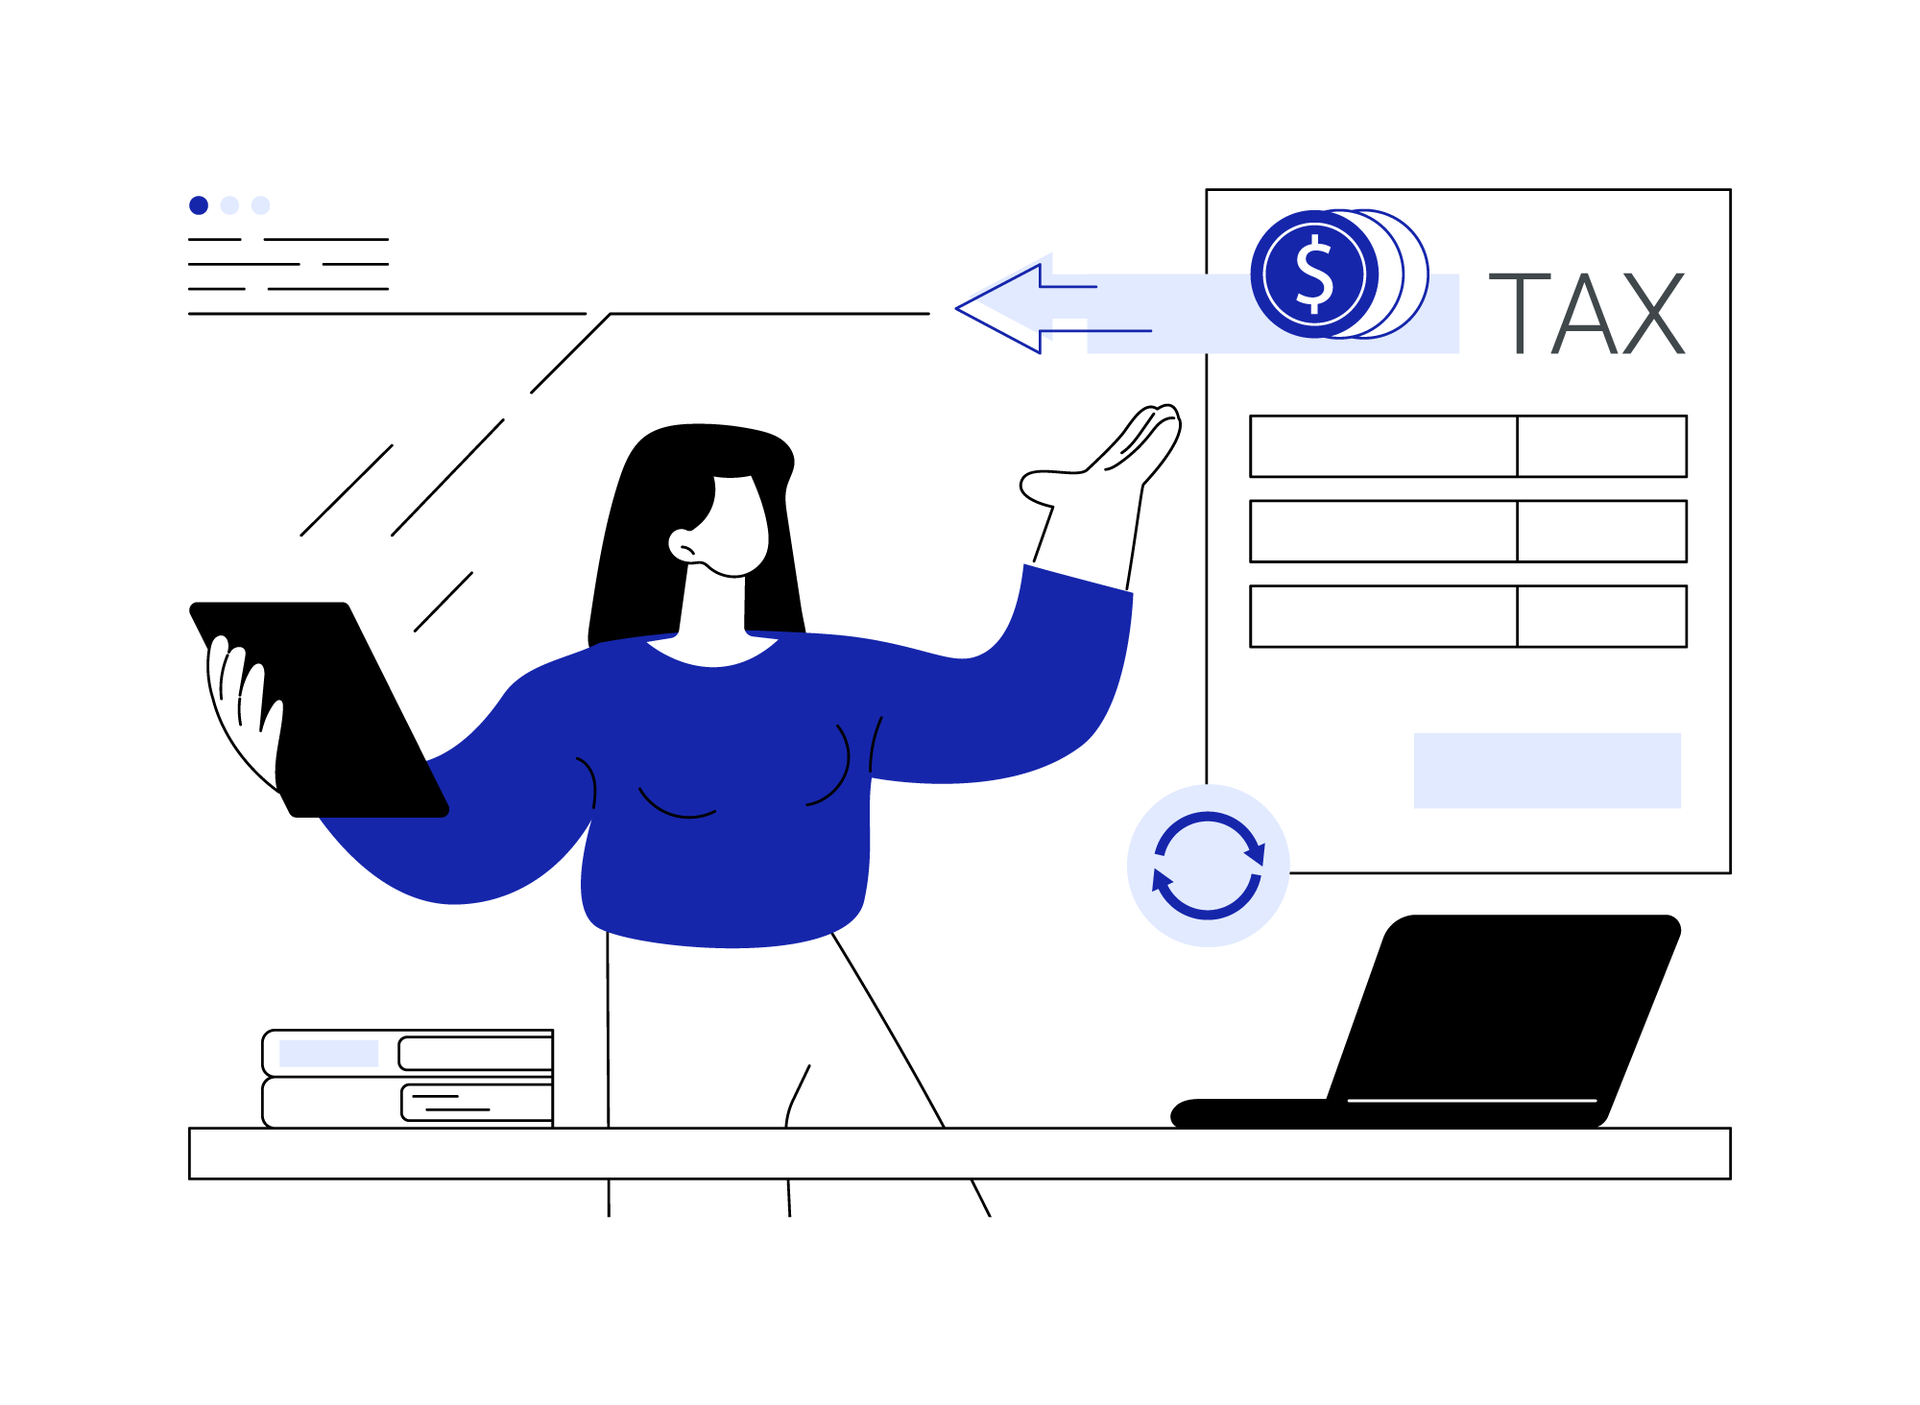 A person standing with the arms out to either side left to right. With the right hand holding a laptop or tablet and the left hand open palm side up. In the background there is graft with the dollar sigh and the word TAX. Image credit Visual Generation/iStock. Clicking begins engagement with content. 